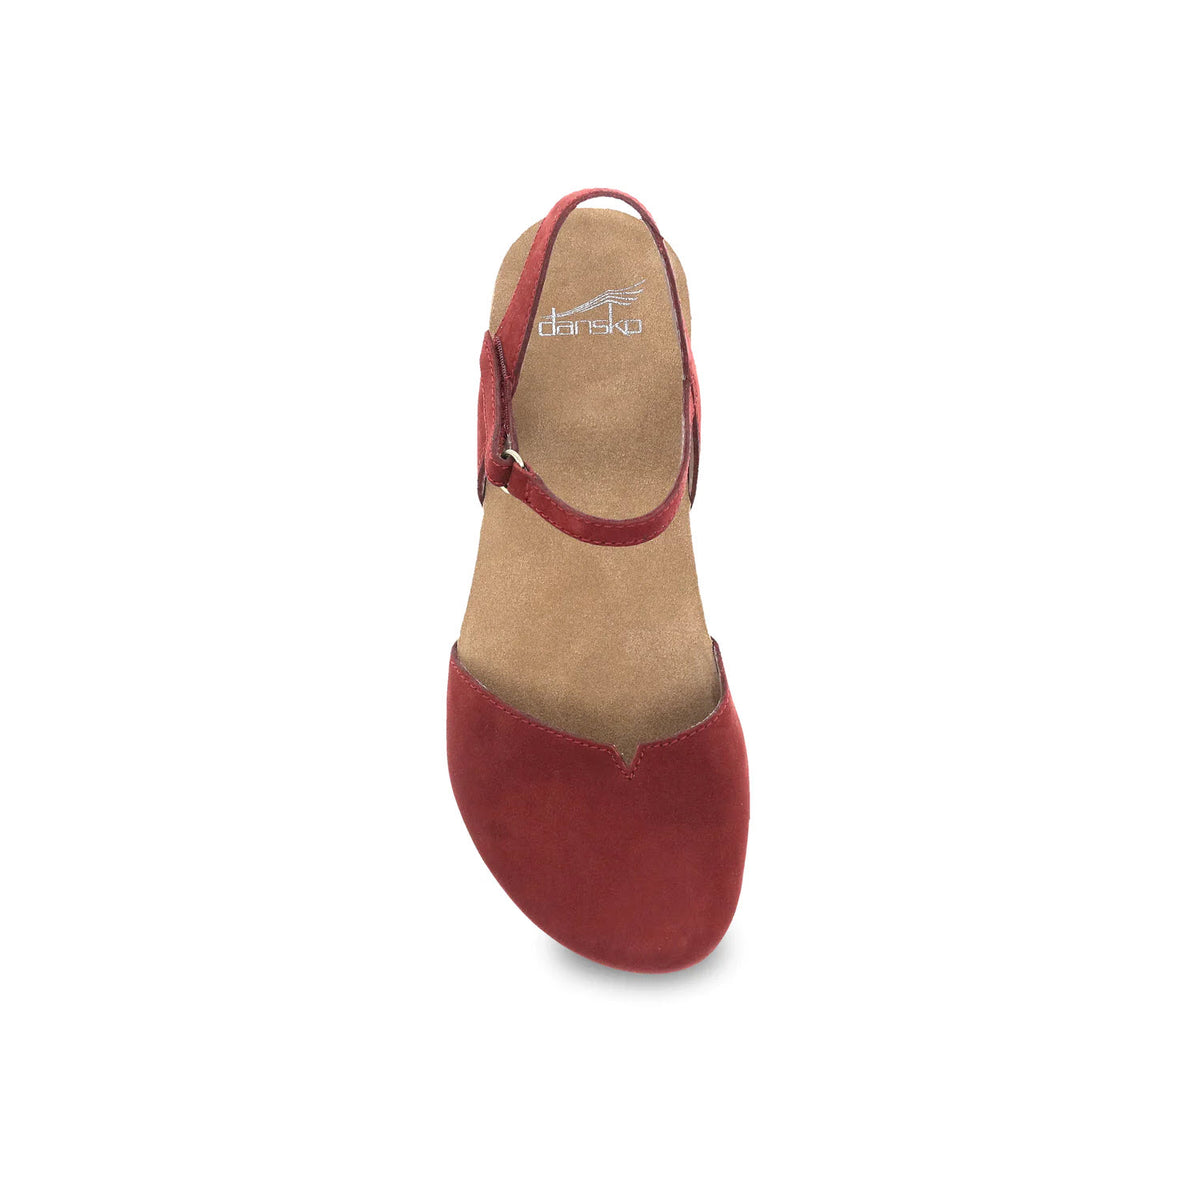 Dansko Rowan Cinnabar - Womens suede closed-toe t-strap shoe with a buckle, viewed from the front, isolated on a white background.